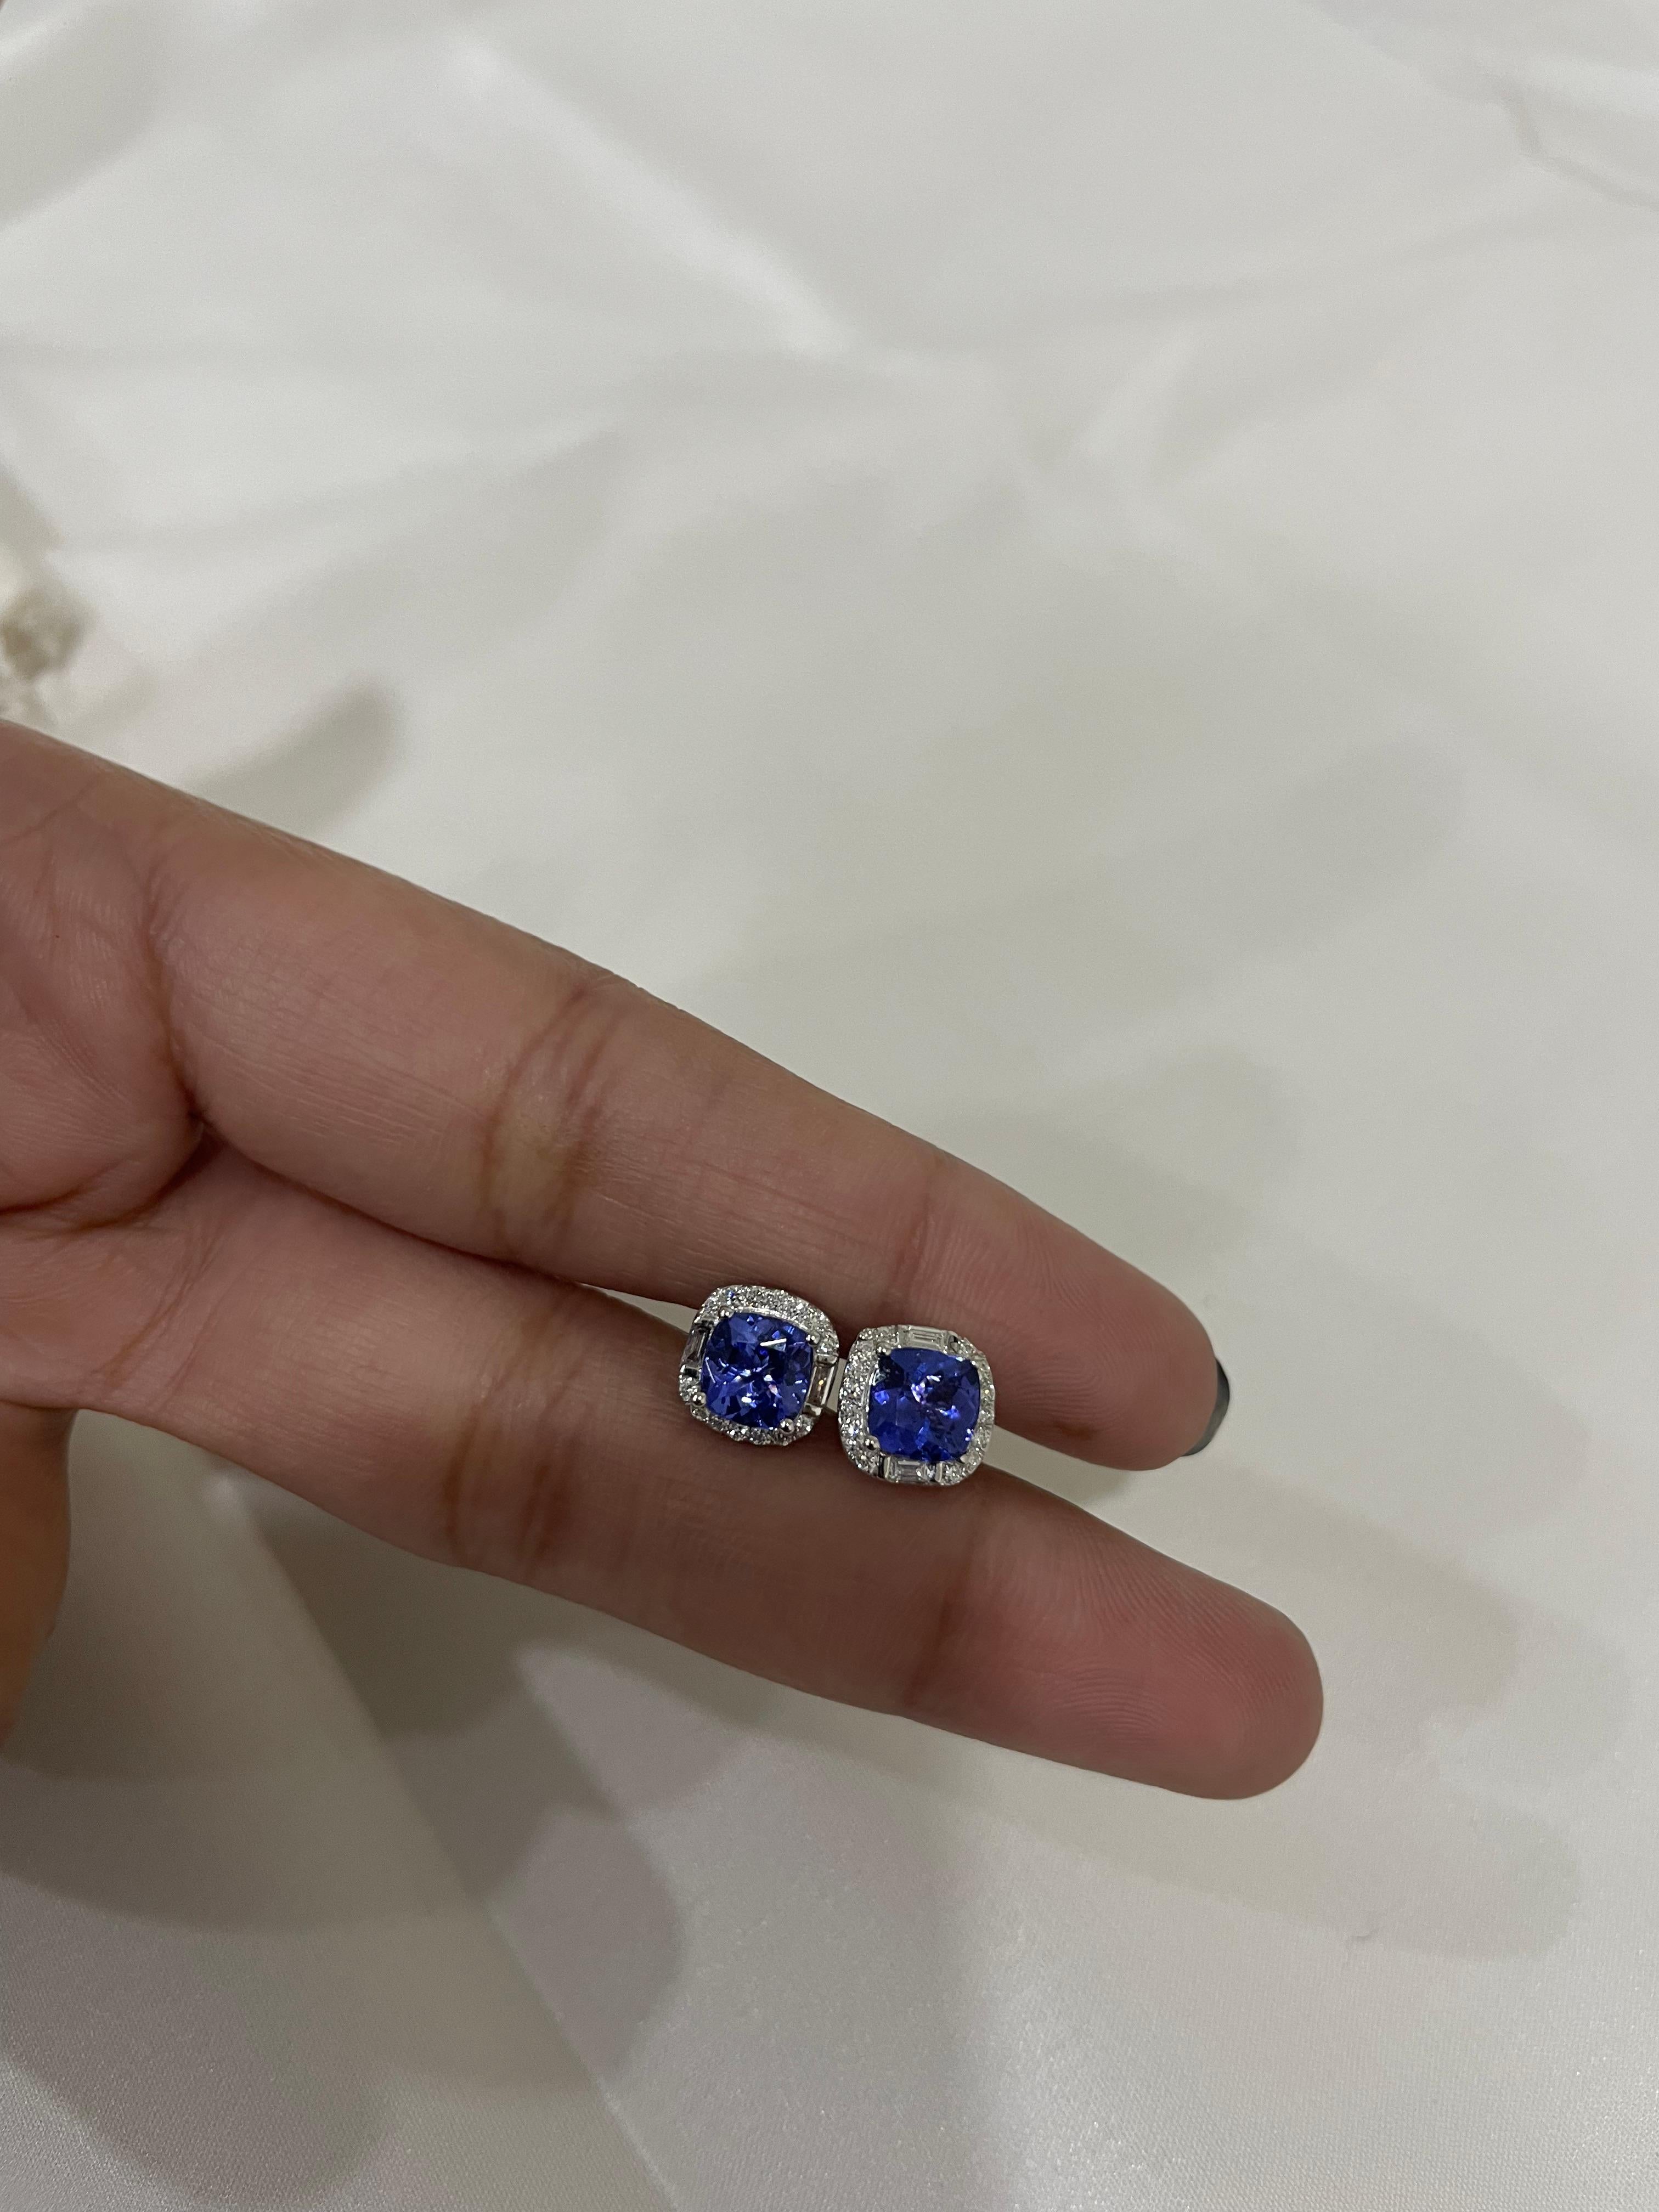 Studs create a subtle beauty while showcasing the colors of the natural precious gemstones and illuminating diamonds making a statement.

Cushion cut tanzanite studs with diamonds in 18K gold. Embrace your look with these stunning pair of earrings